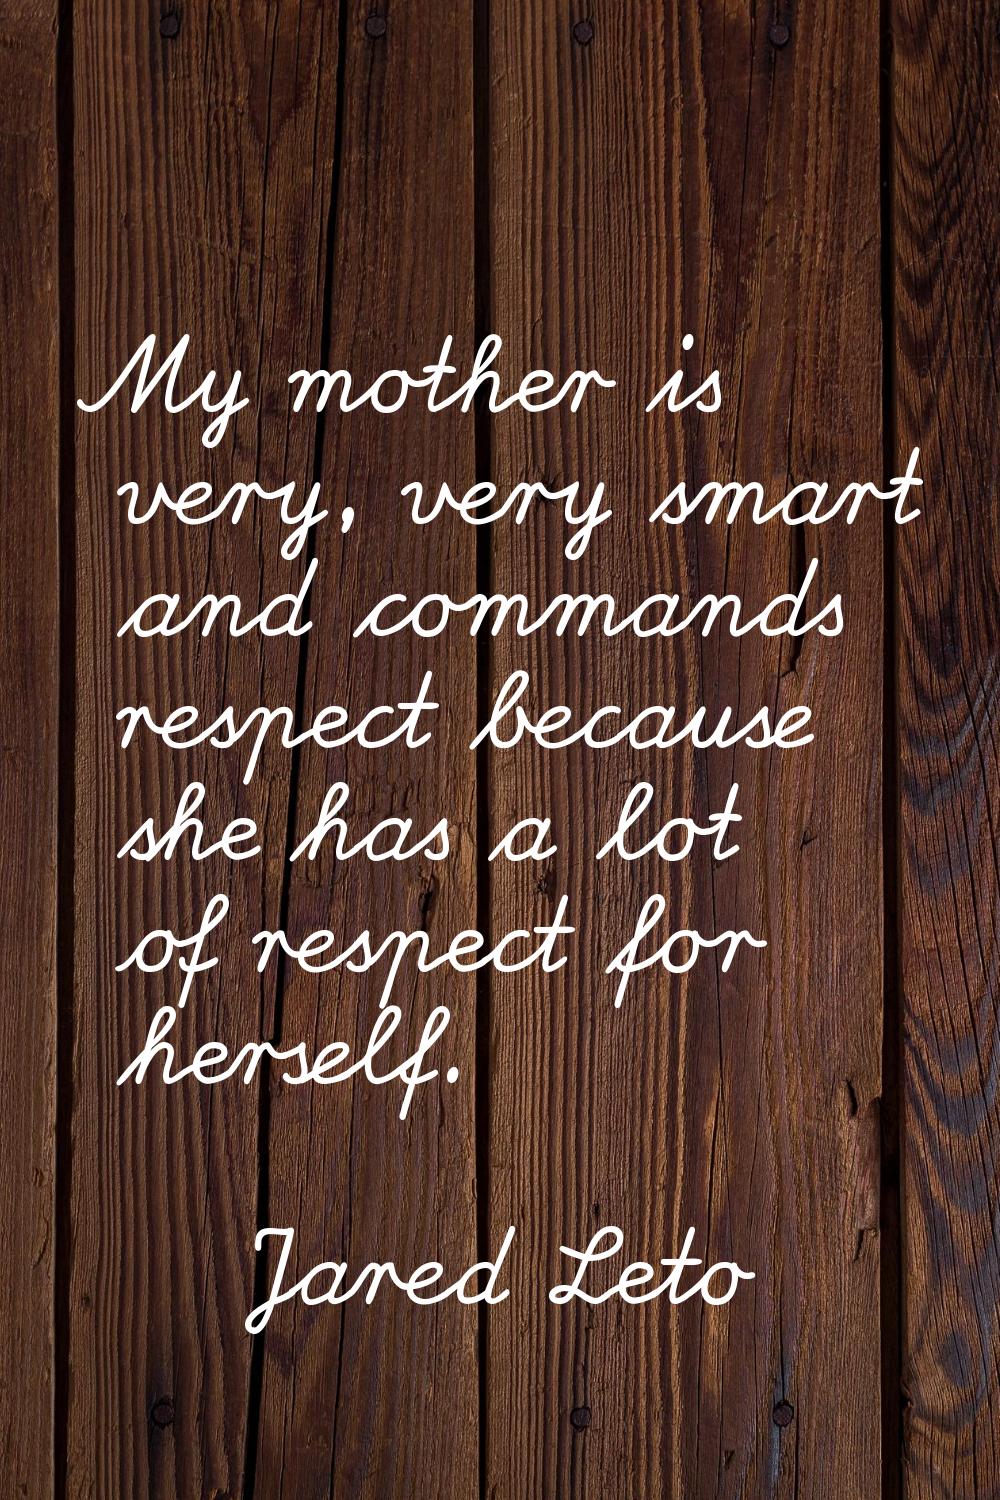 My mother is very, very smart and commands respect because she has a lot of respect for herself.